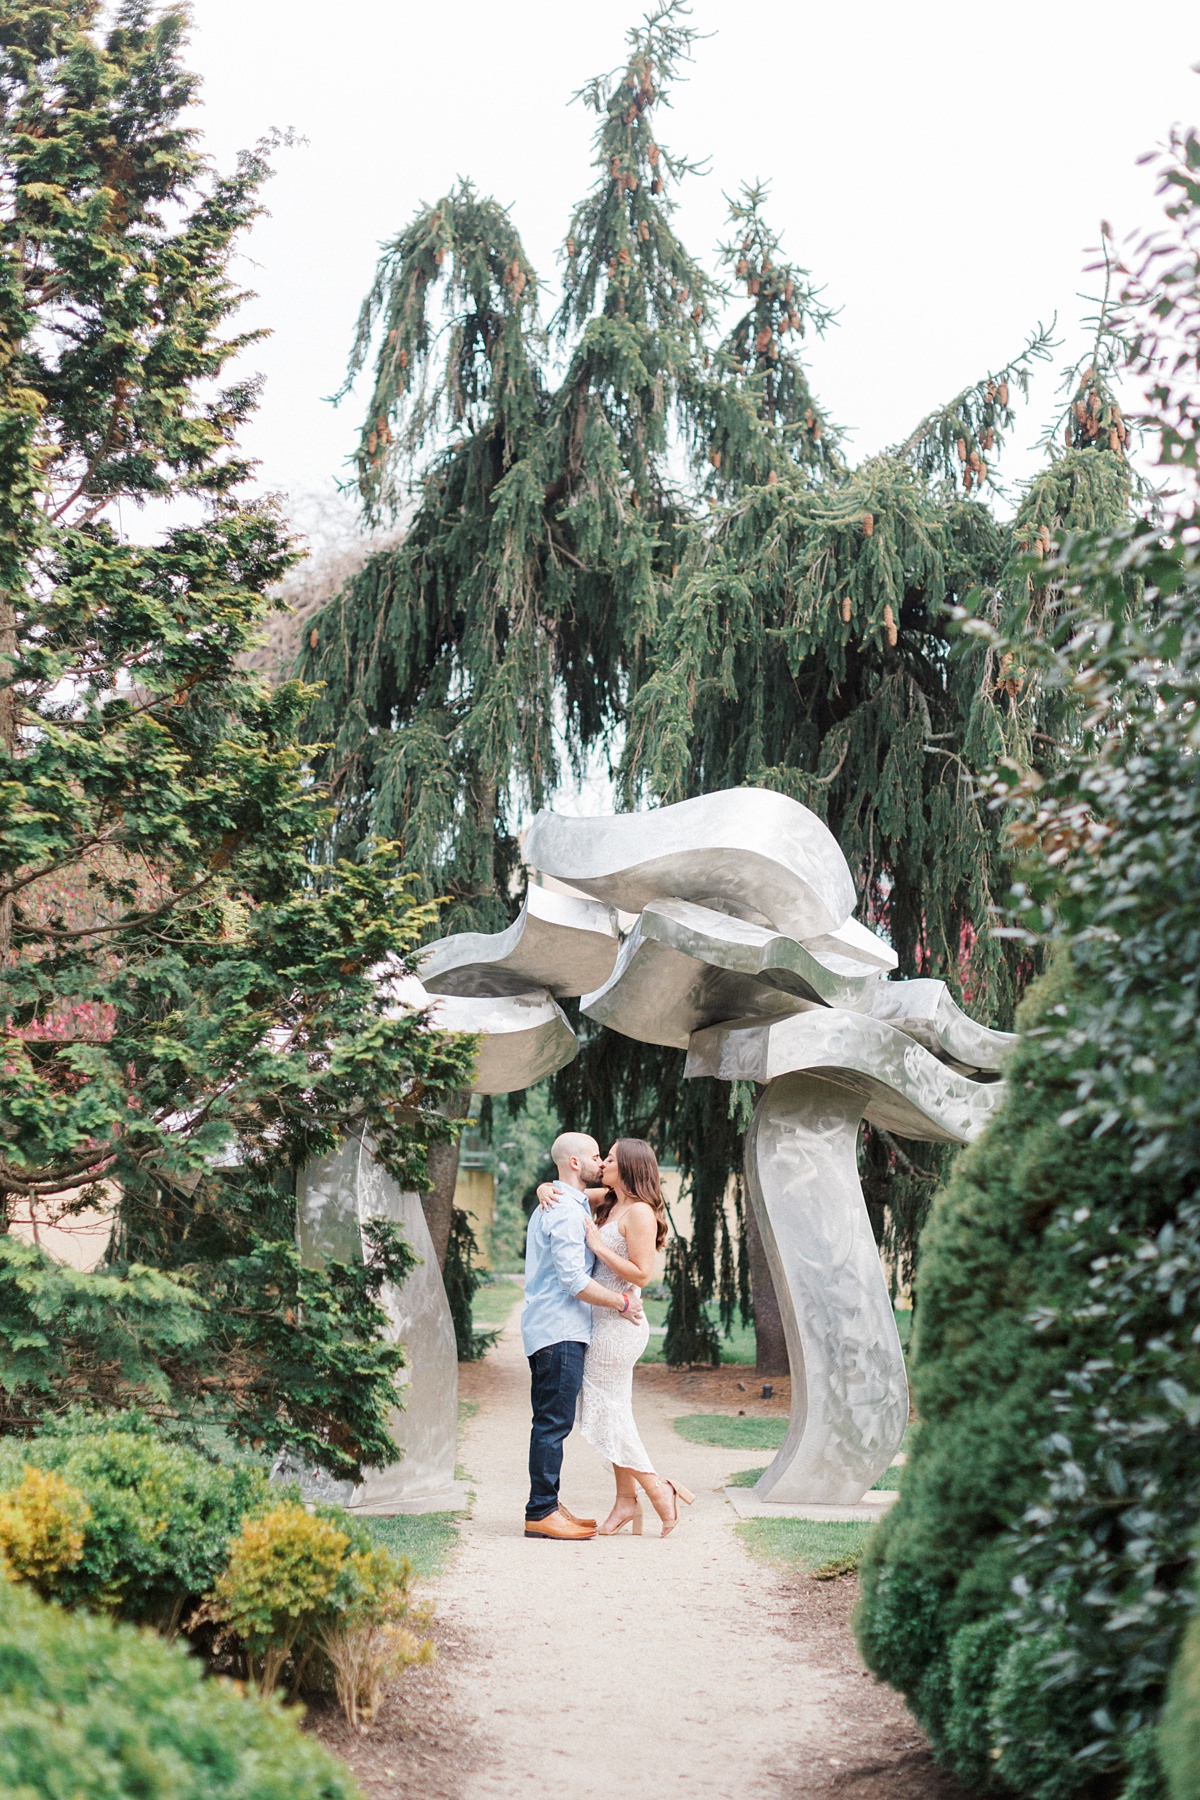 Spring Grounds for Sculpture Engagement | Jill Sahner Photography